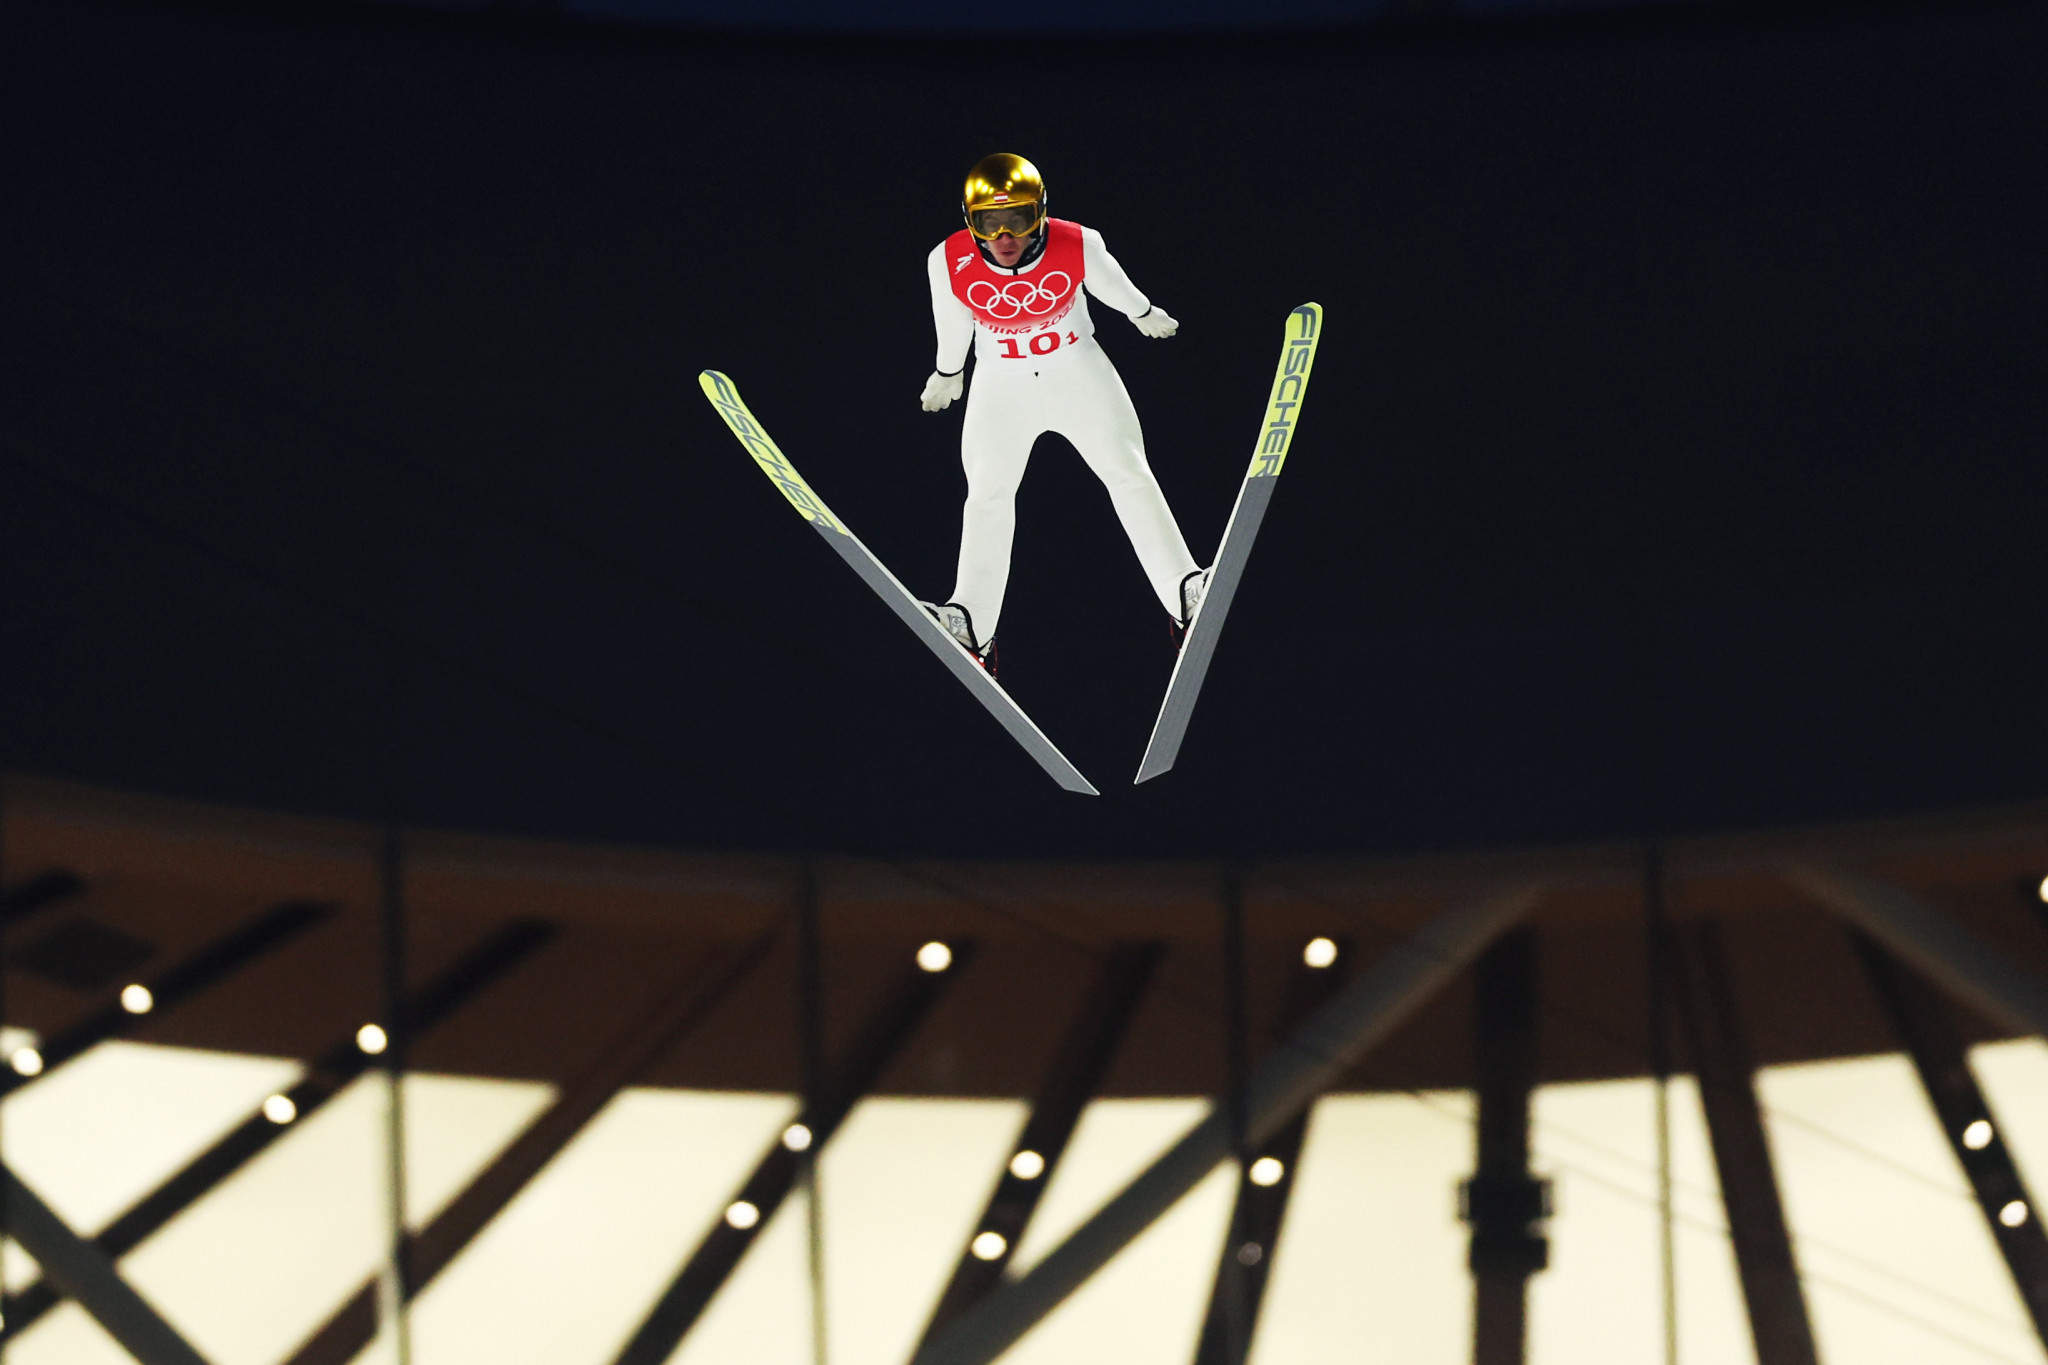 Stefan Lahti won his second consecutive title at the Ski Jumping World Cup in Lahti ©Getty Images